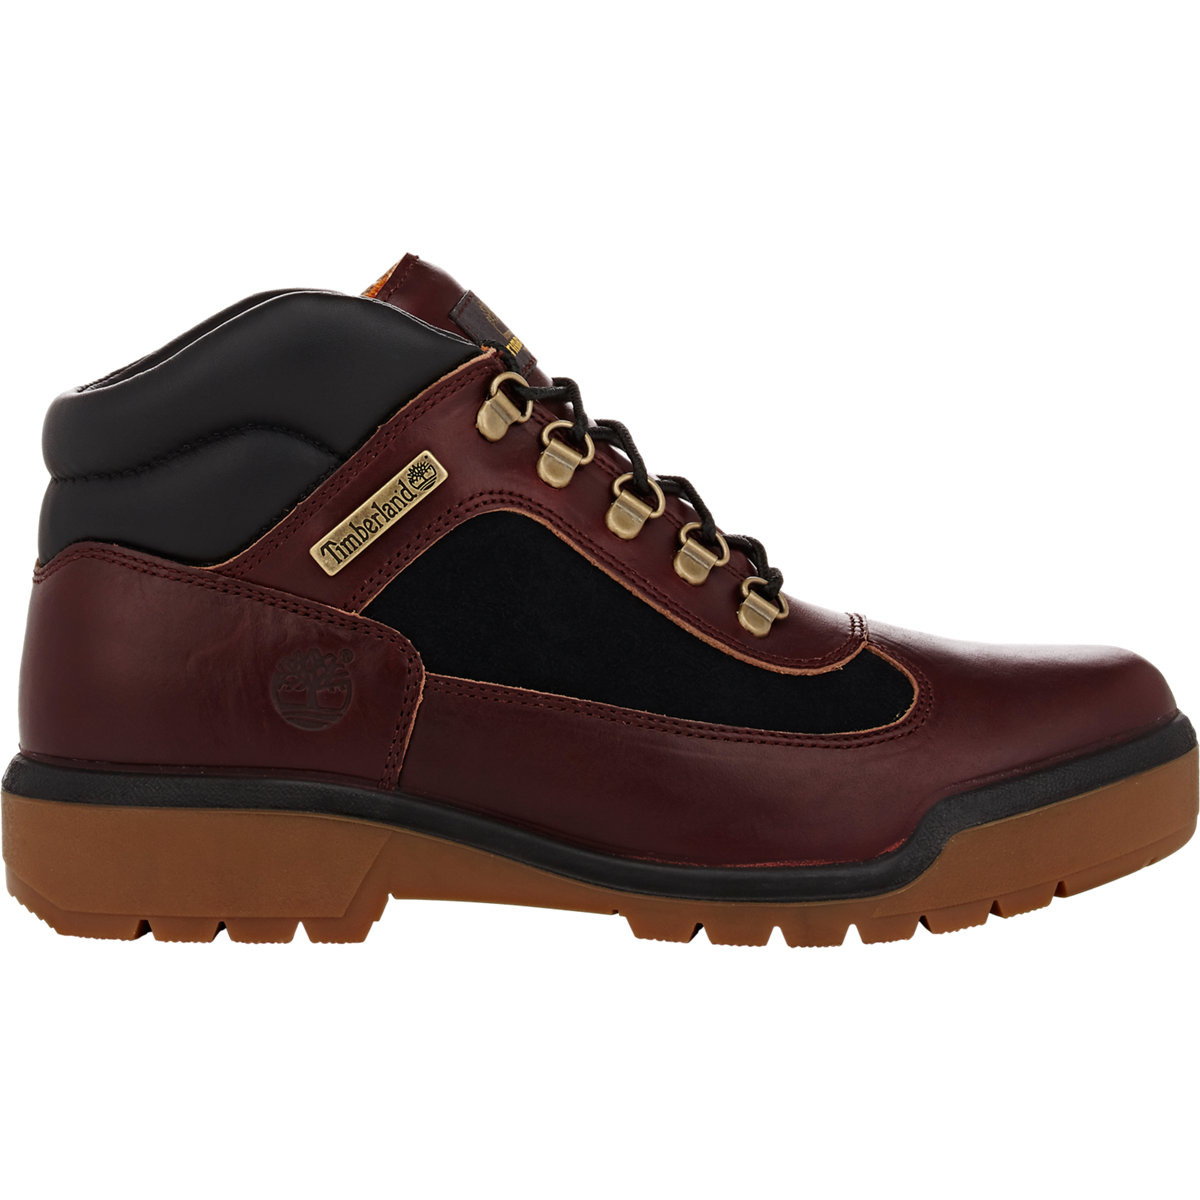 Lyst - Timberland Men's Field Boots in Red for Men